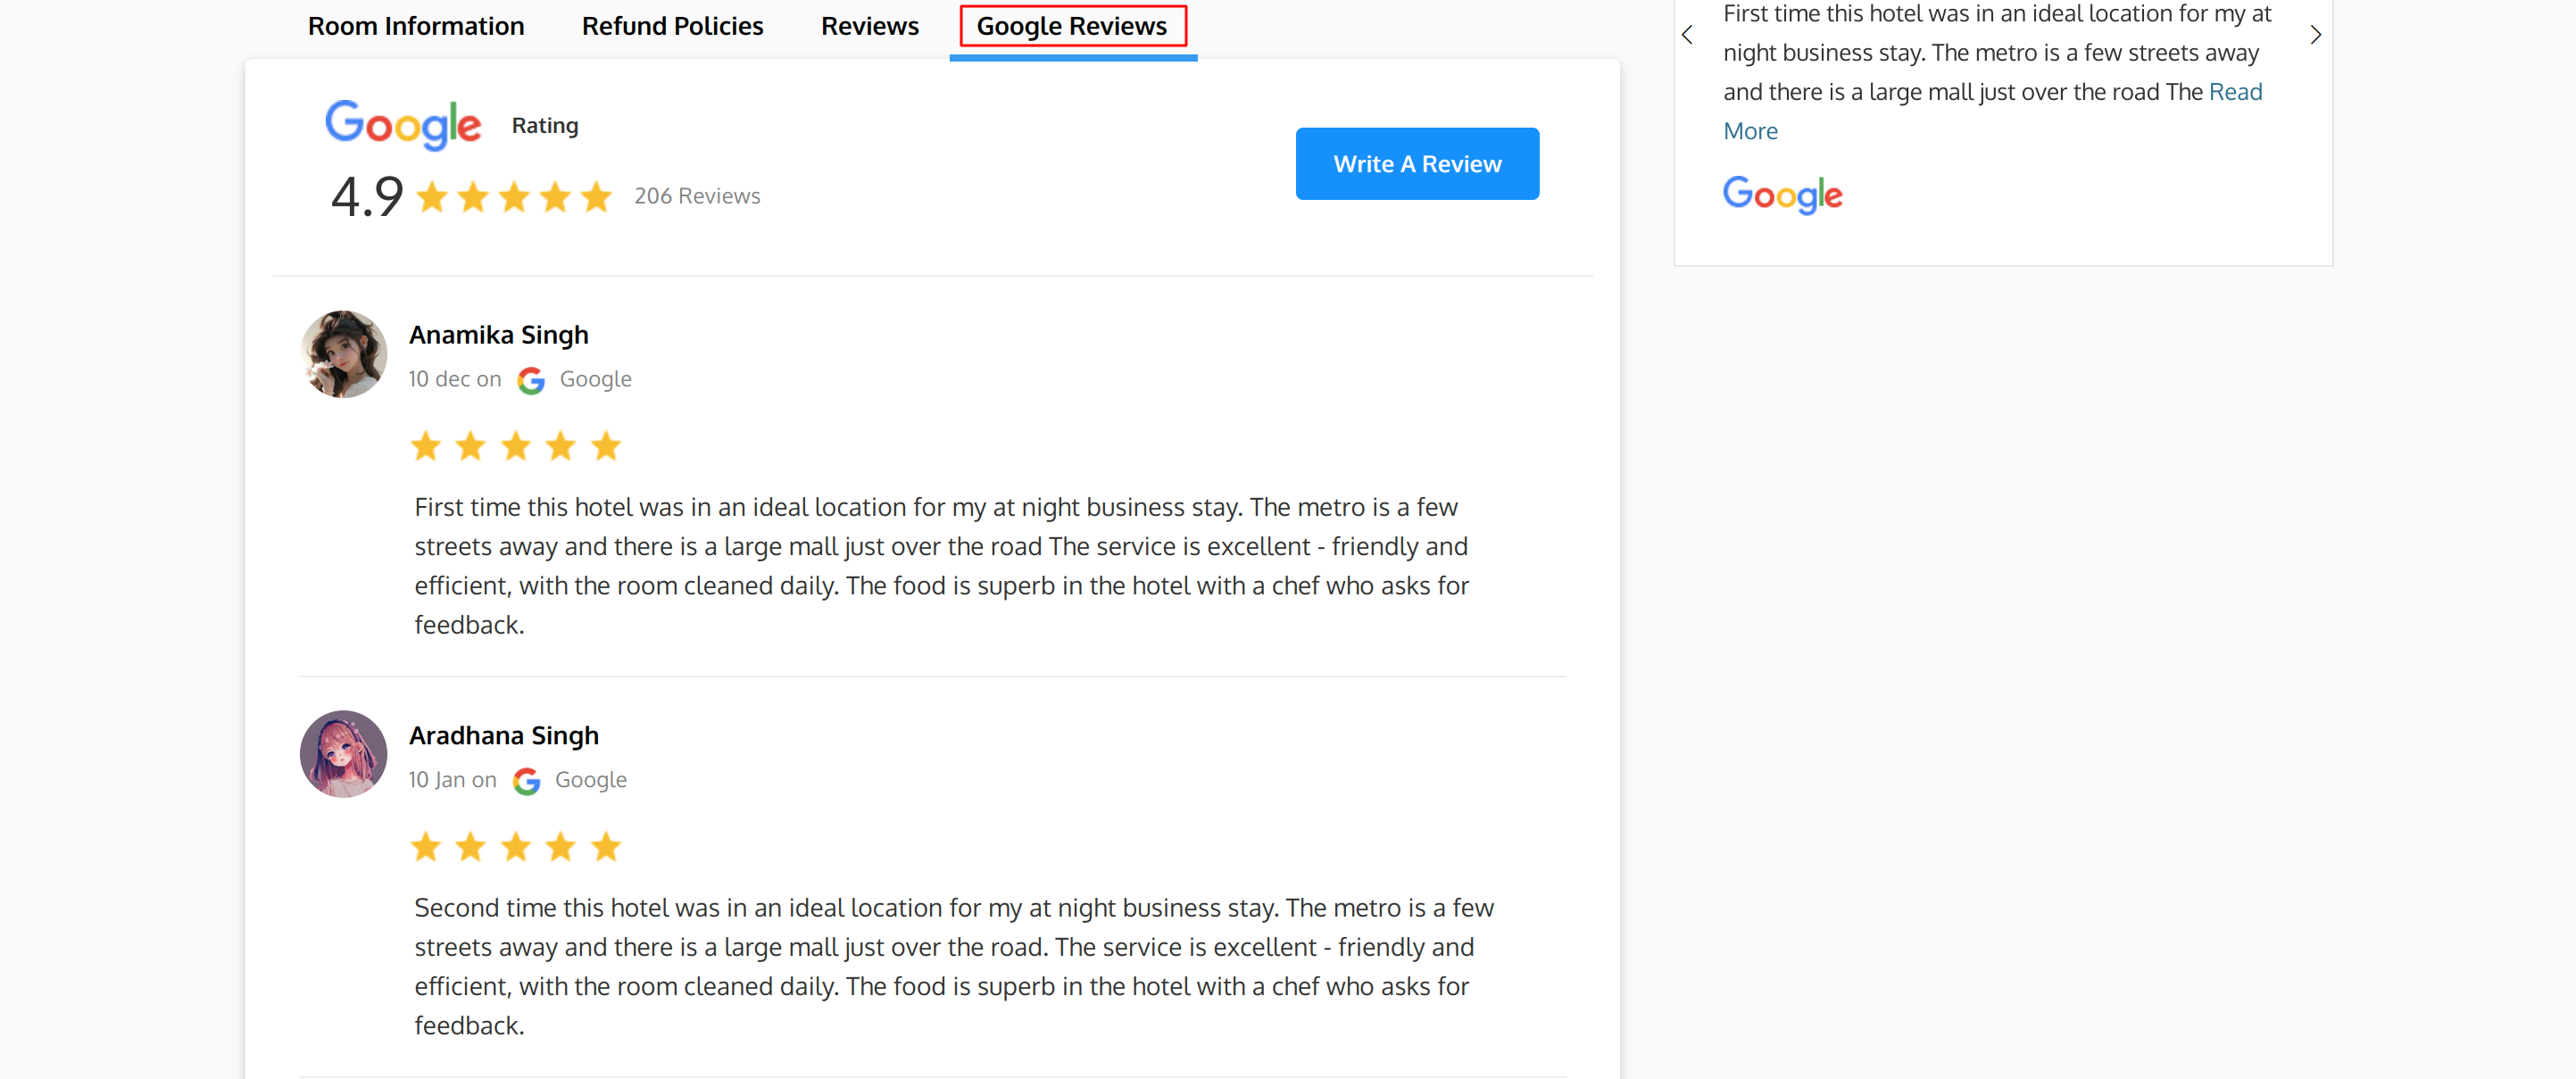 Google Reviews on Room Type Information page Reviews Block